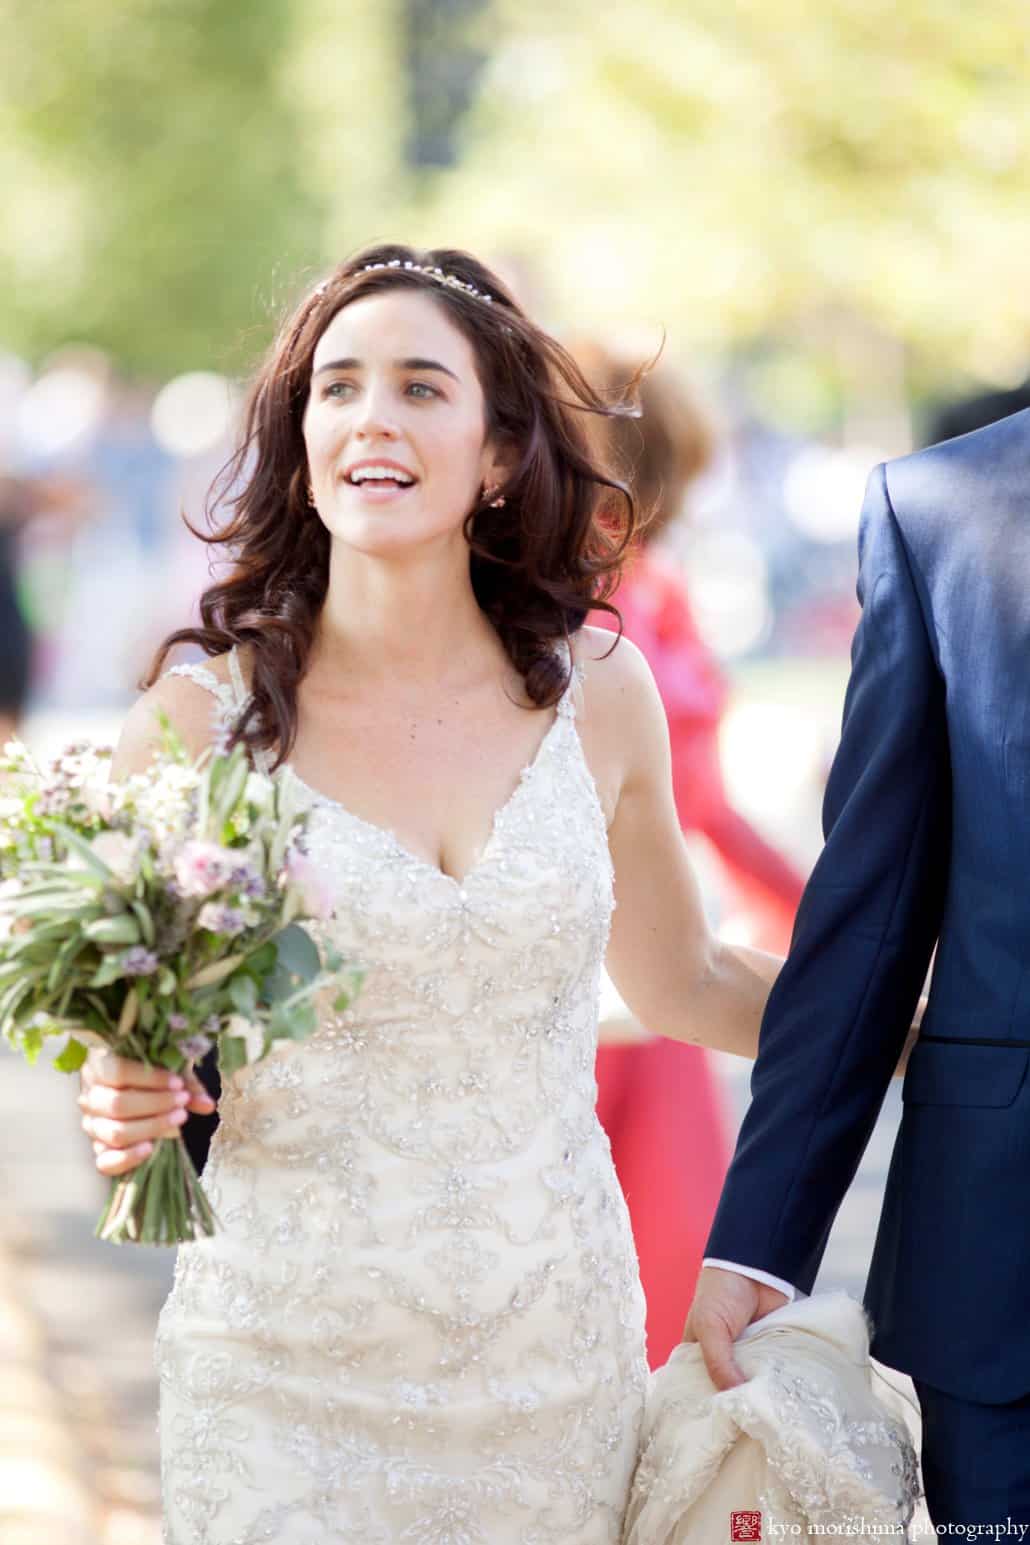 Bride smiles while walking to Governors Island wedding ceremony; dress by Maggie Sottero, photographed by Kyo Morishima